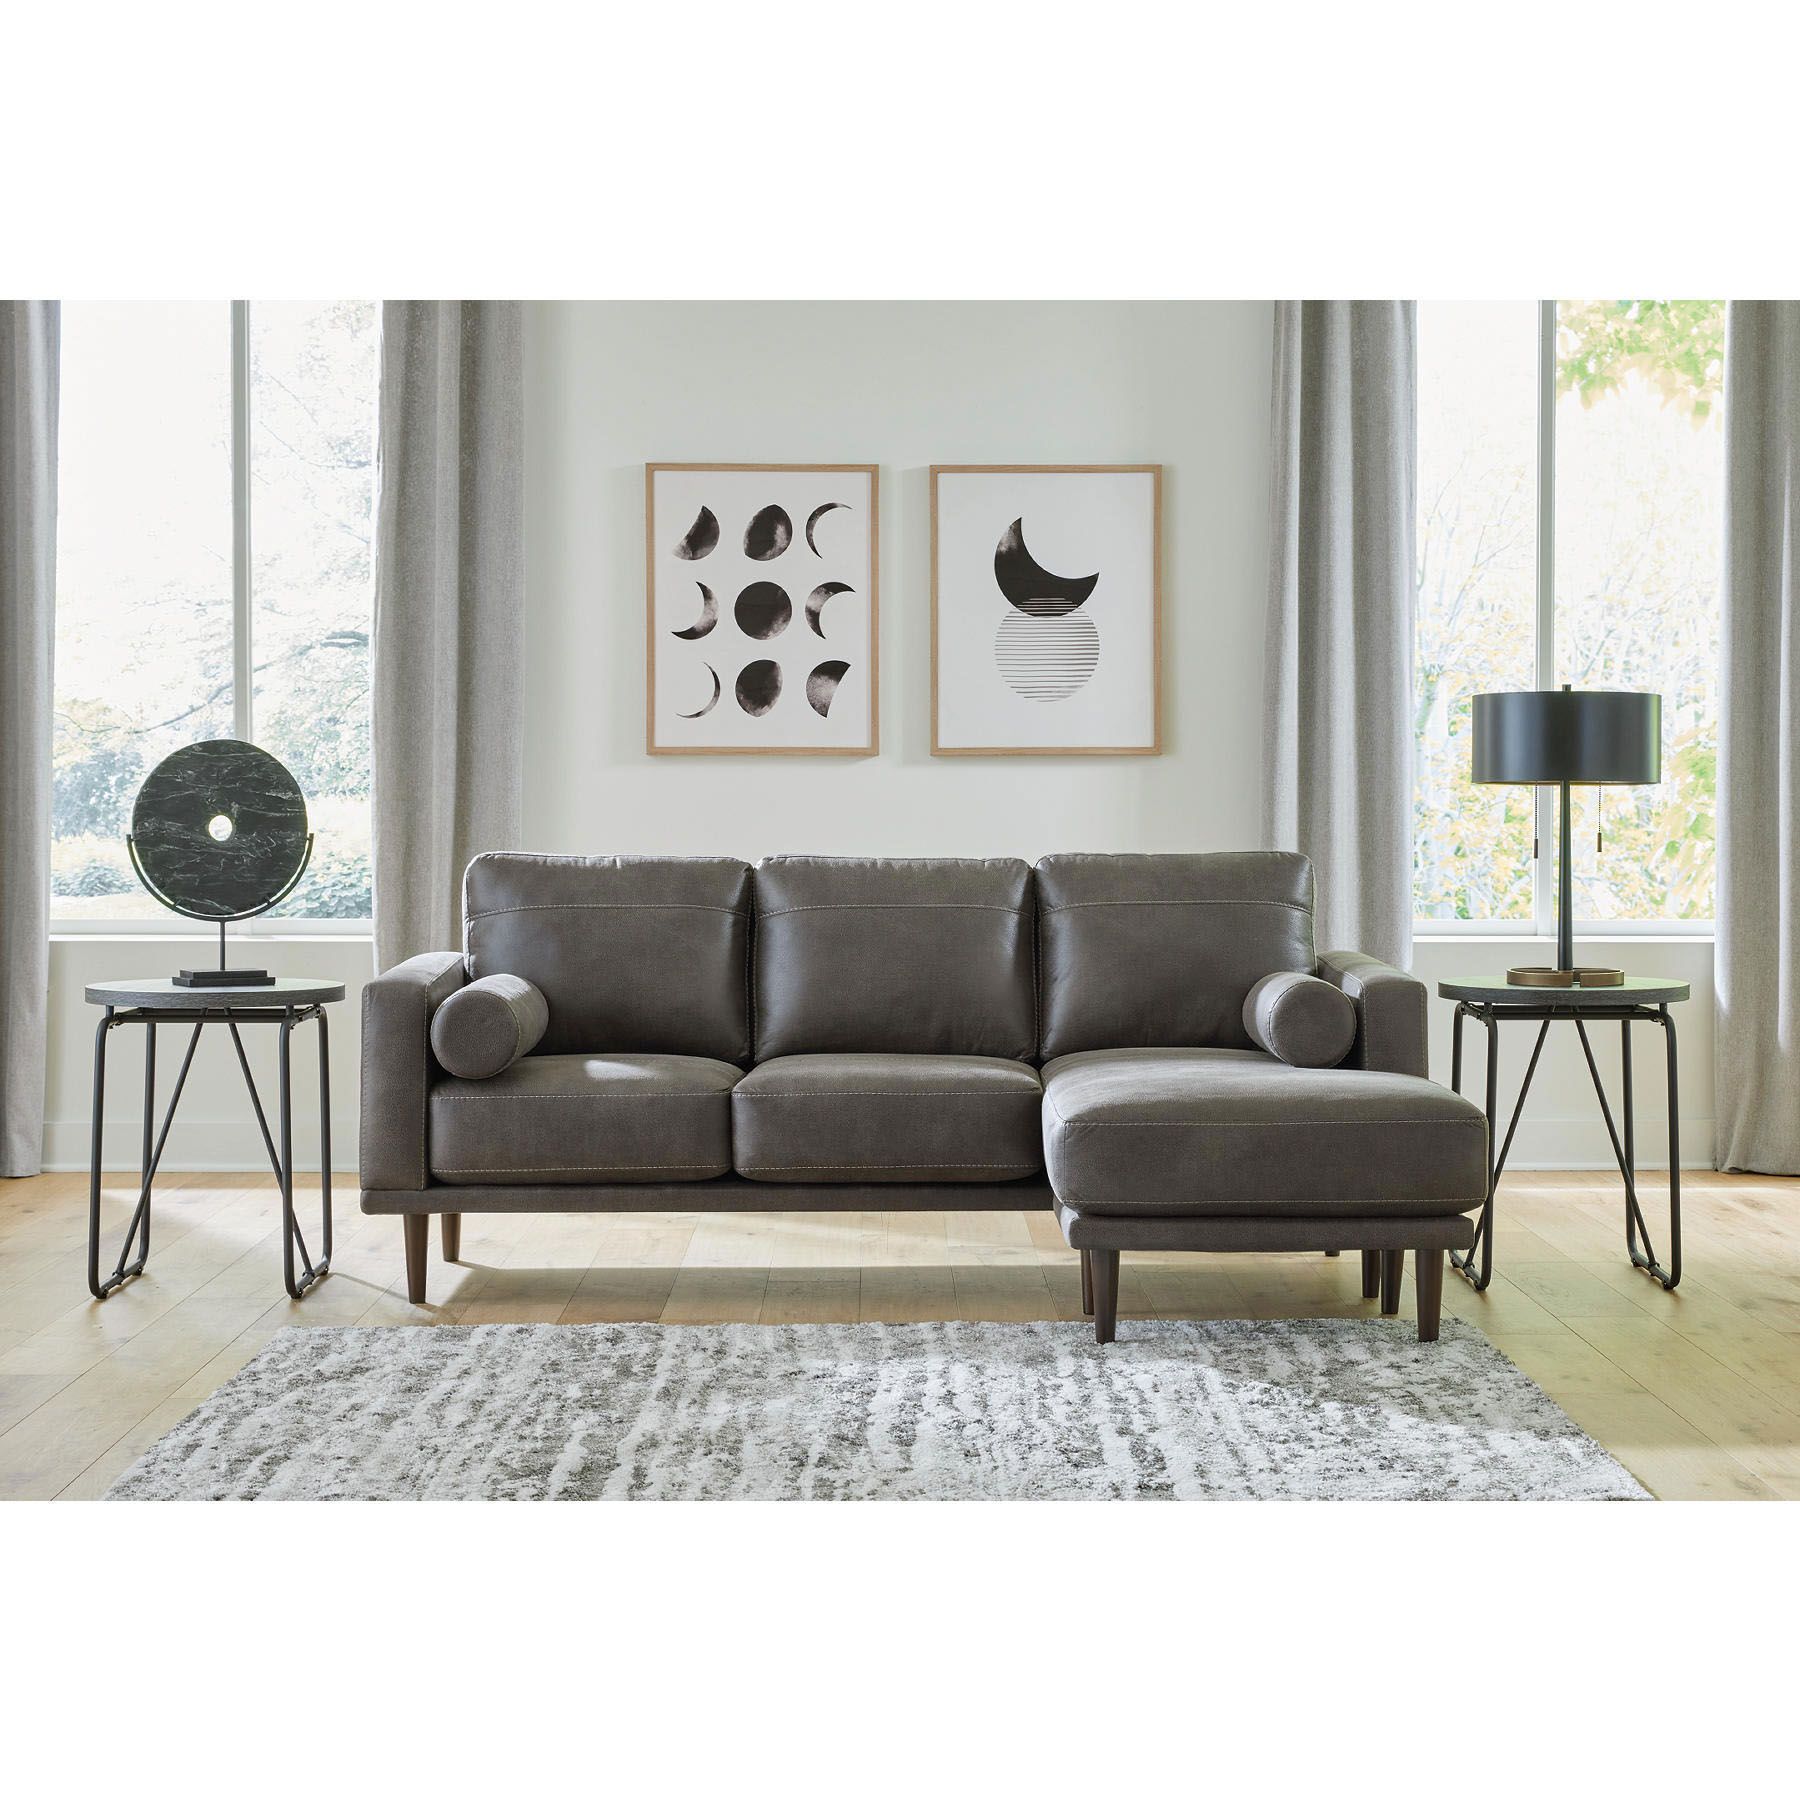 Arroyo Faux Leather Sofa Chaise